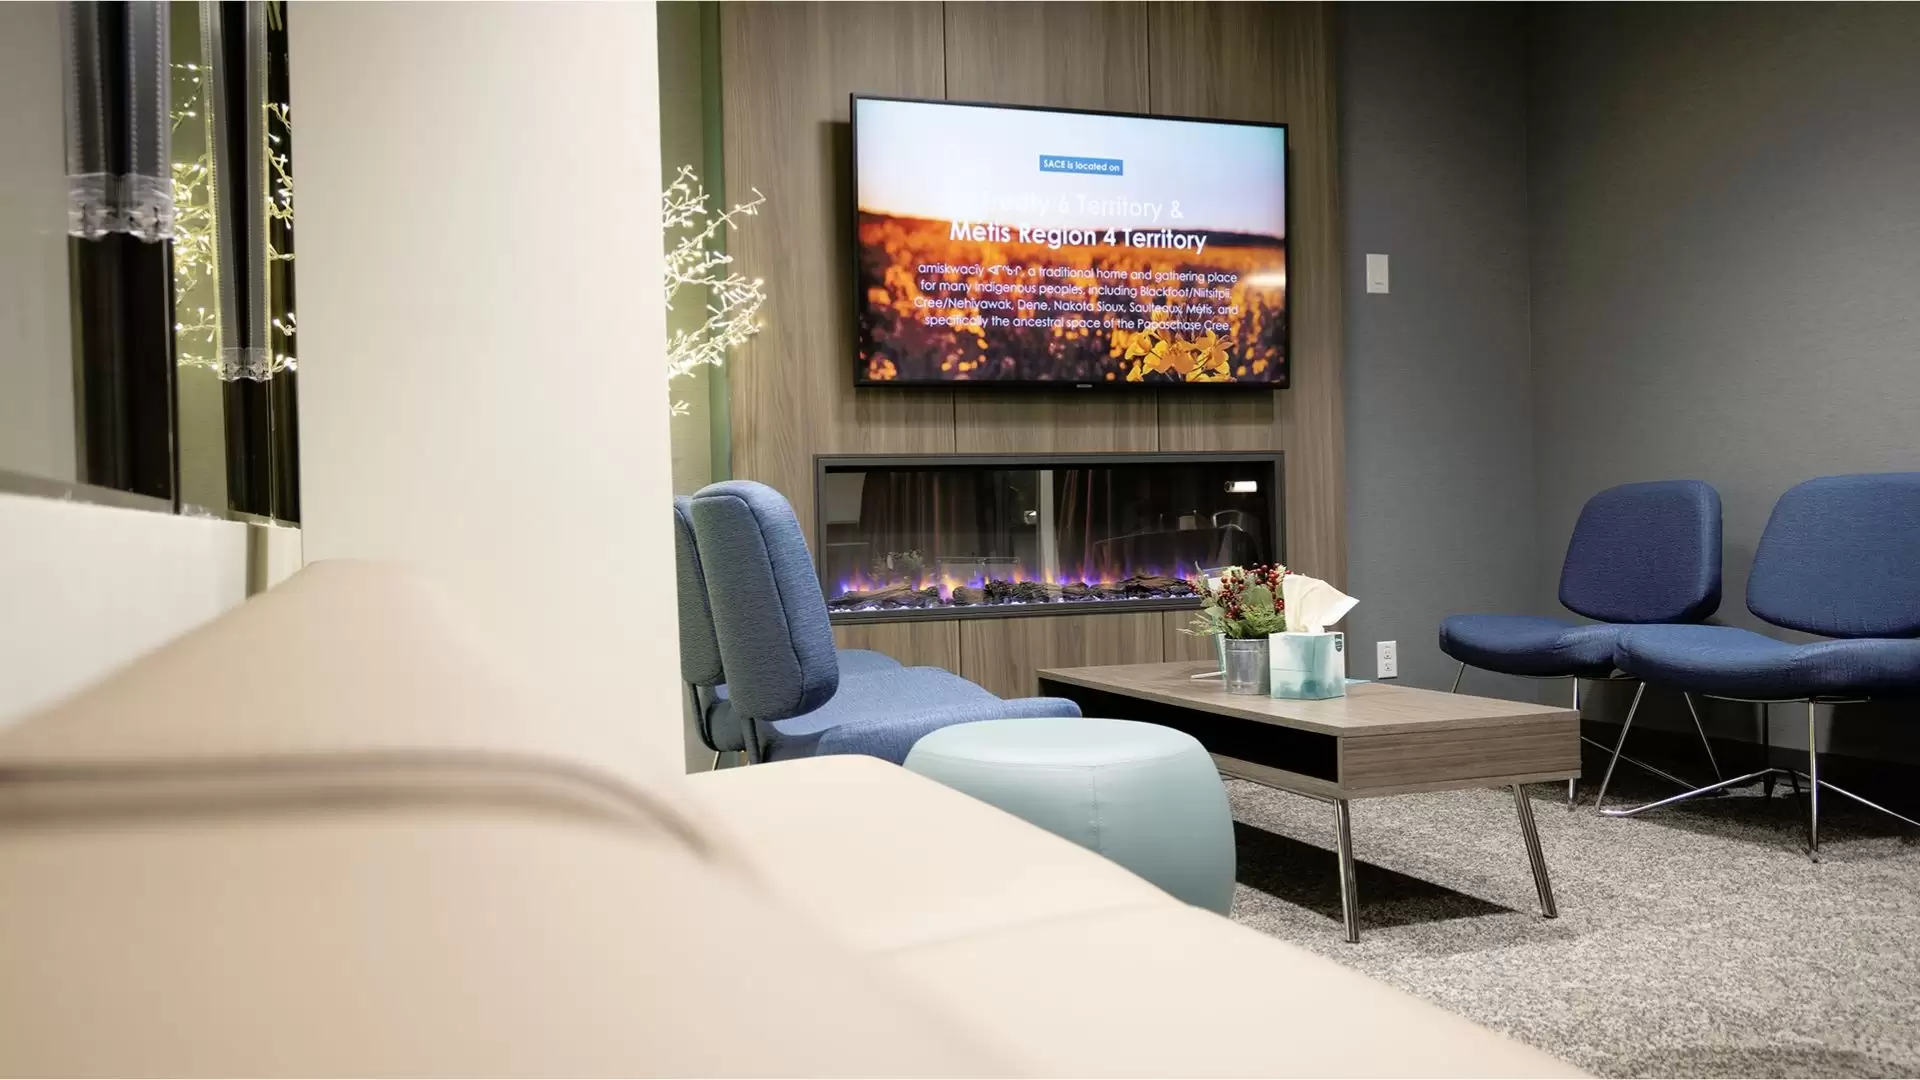 SACE reception waiting area at night with dark chairs, stool, table, and electric fireplace with flat screen TV.